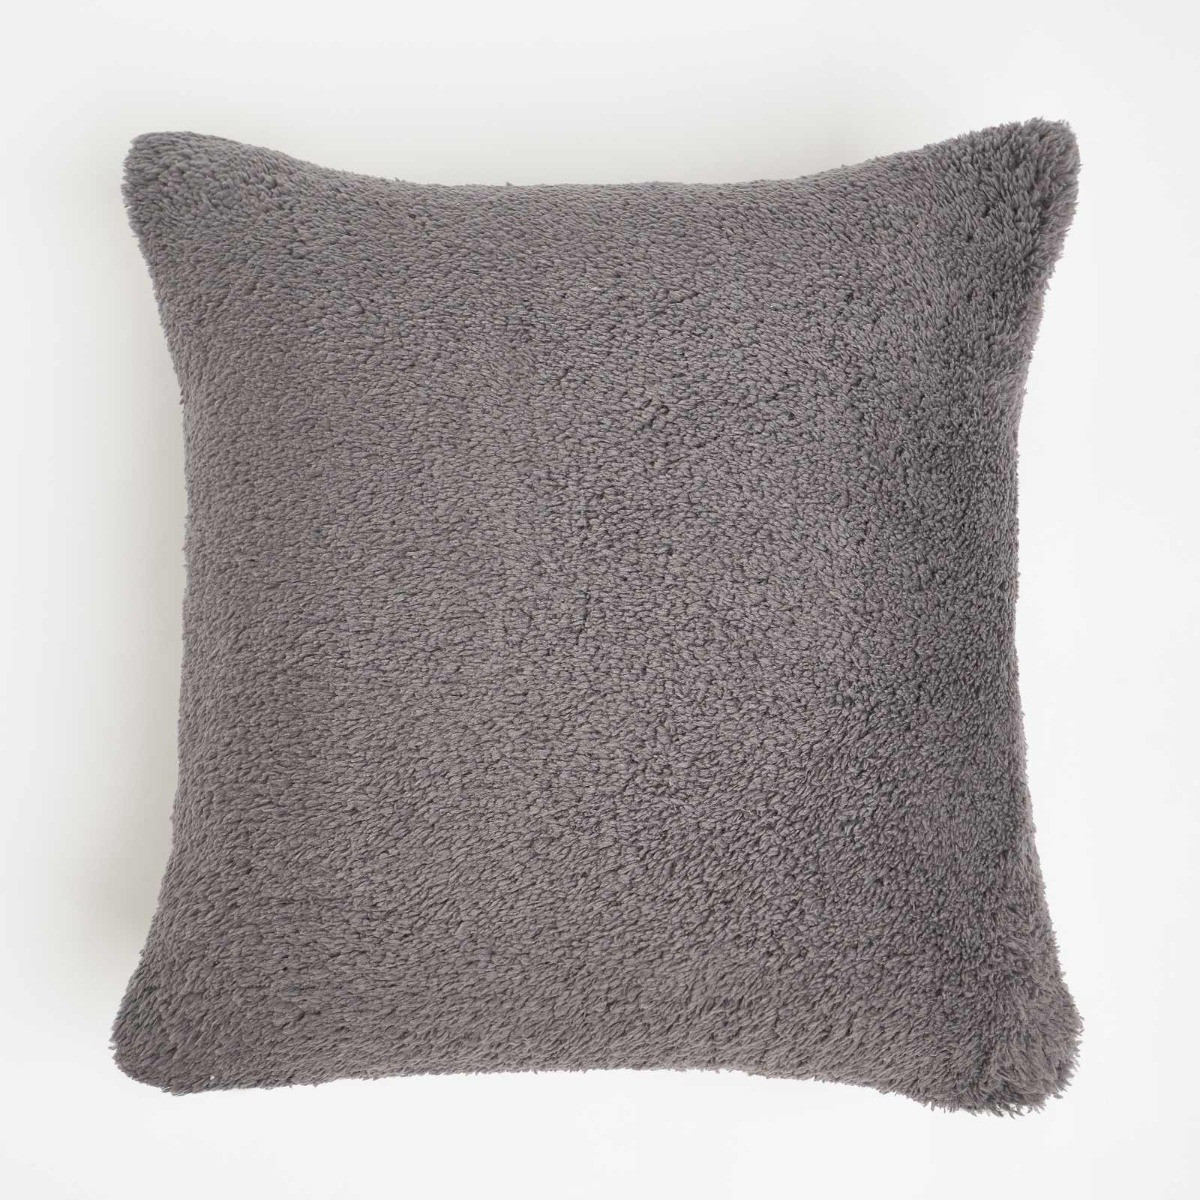 Brentfords 2 Pack Teddy Cushion Covers - Charcoal>